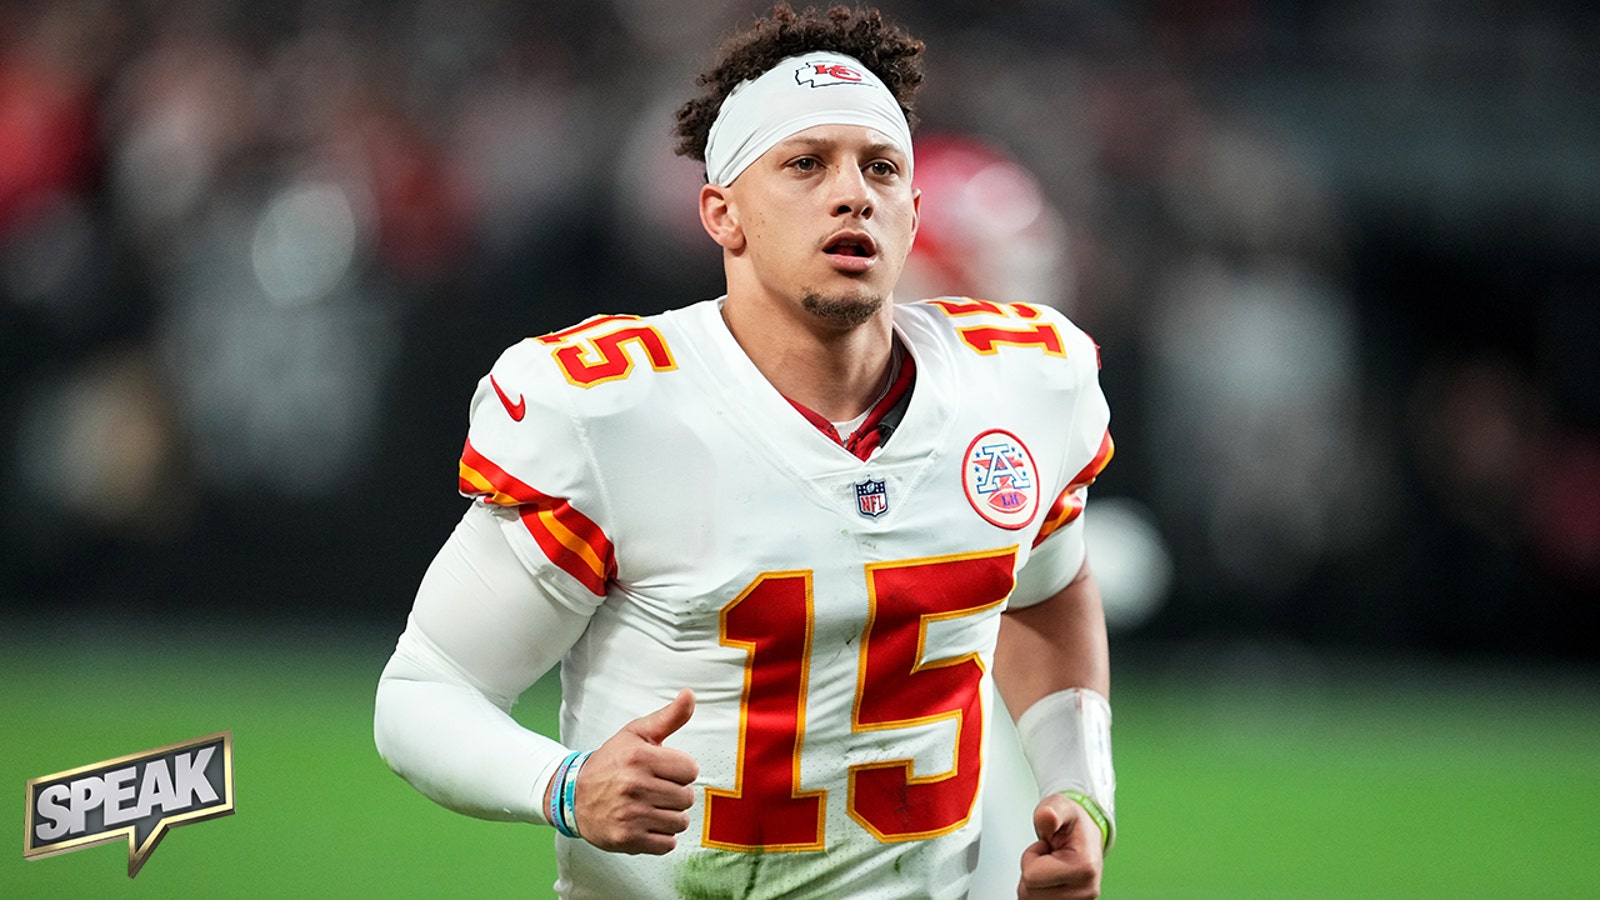 Patrick Mahomes on if Chiefs are a dynasty: 'You gotta win 3'